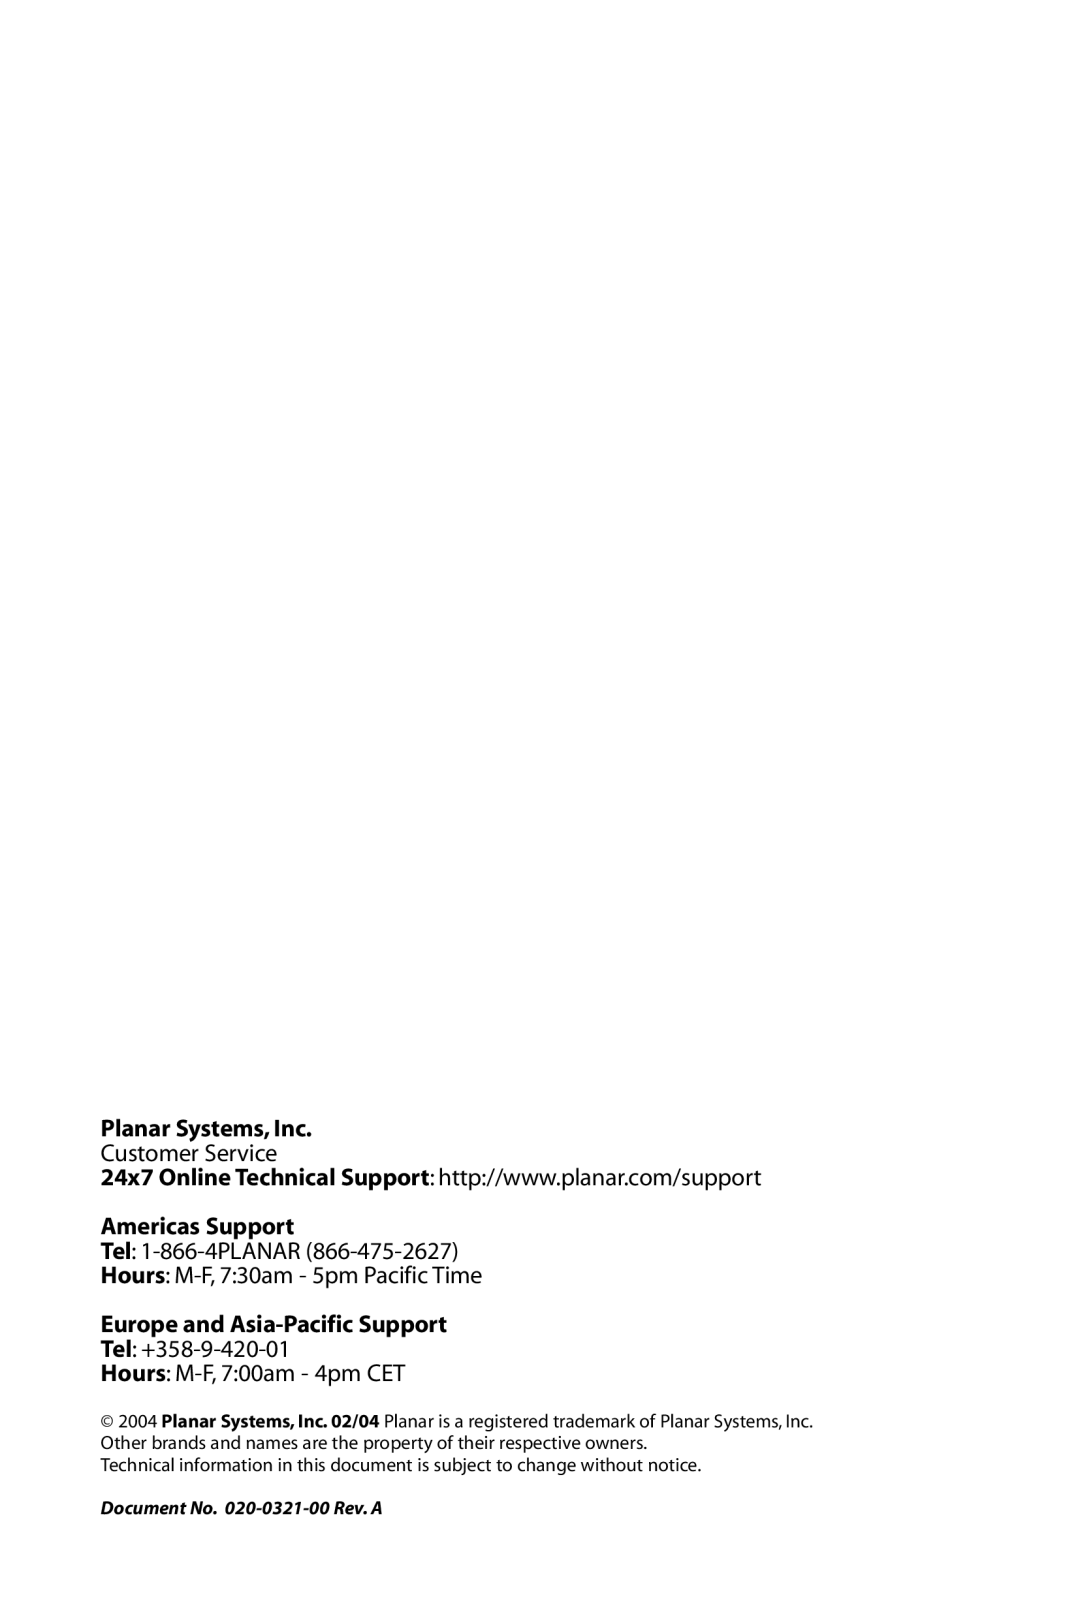 Planar LA1910RTC manual Planar Systems, Inc, Customer Service, Americas Support, Europe and Asia-Pacific Support 